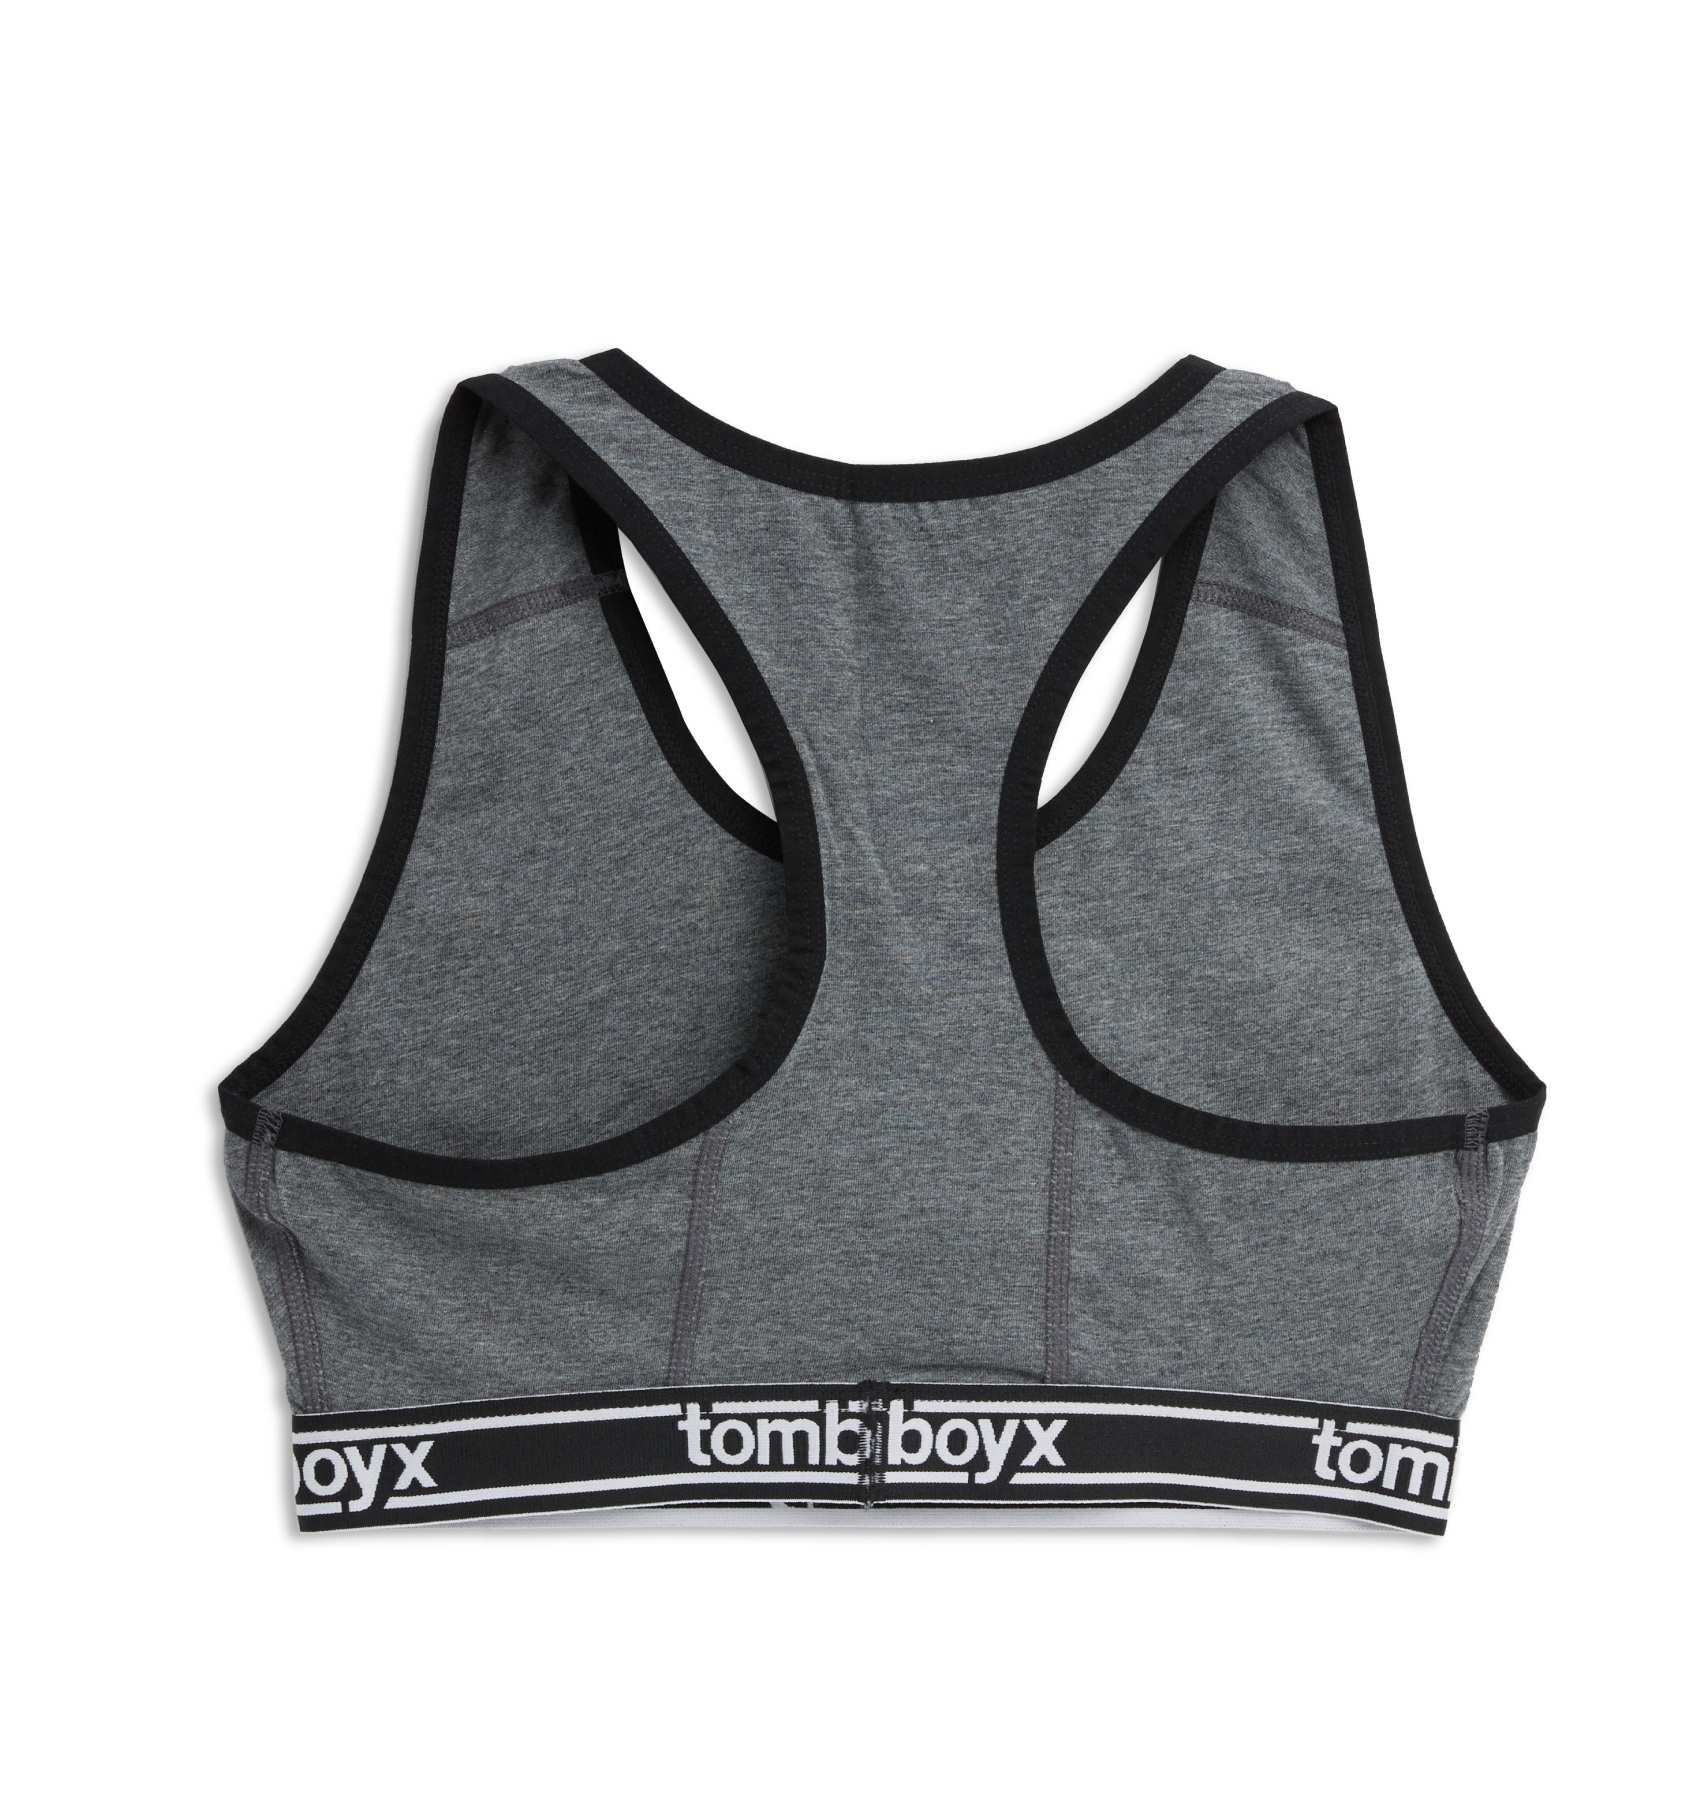 Fruit of the Loom Black/White/Gray Ruched Front Sports Bras -3-Pack